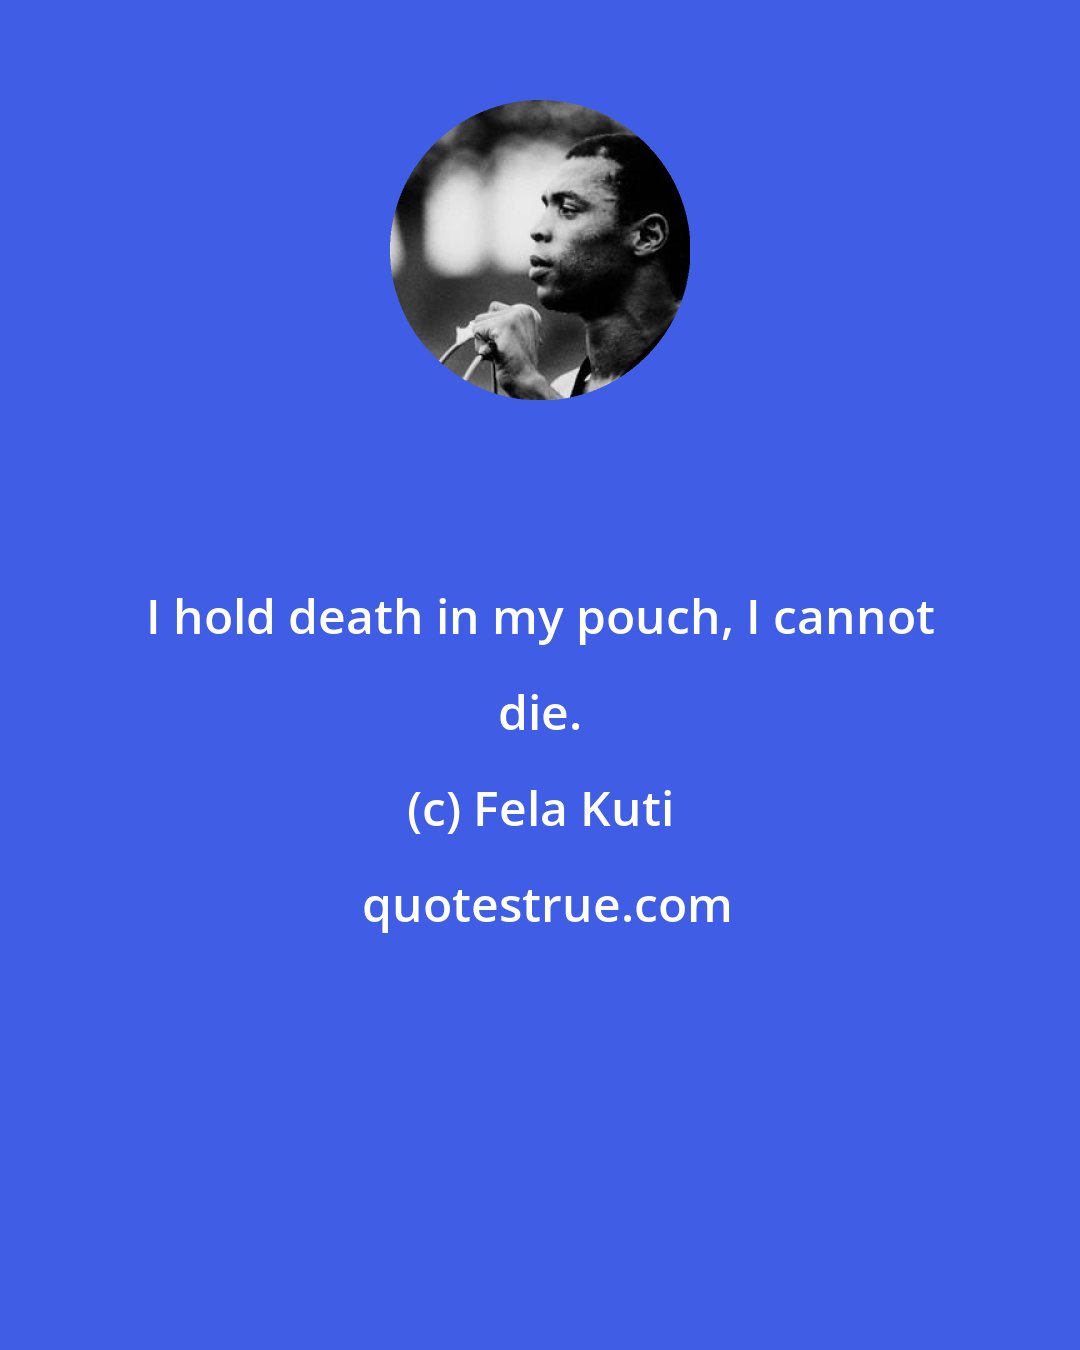 Fela Kuti: I hold death in my pouch, I cannot die.